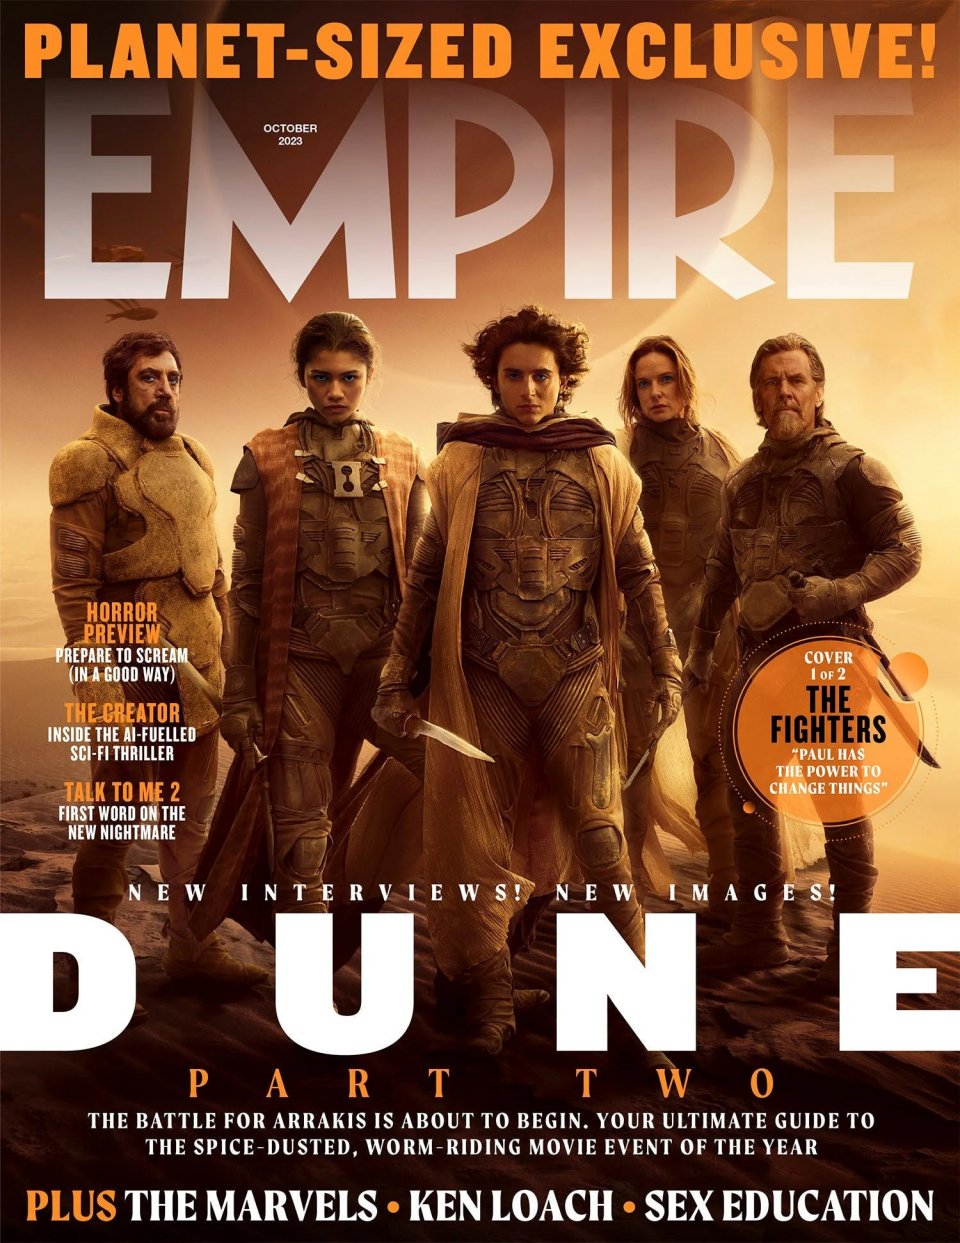 Dune Part Two Empire Magazine Cover Fighters